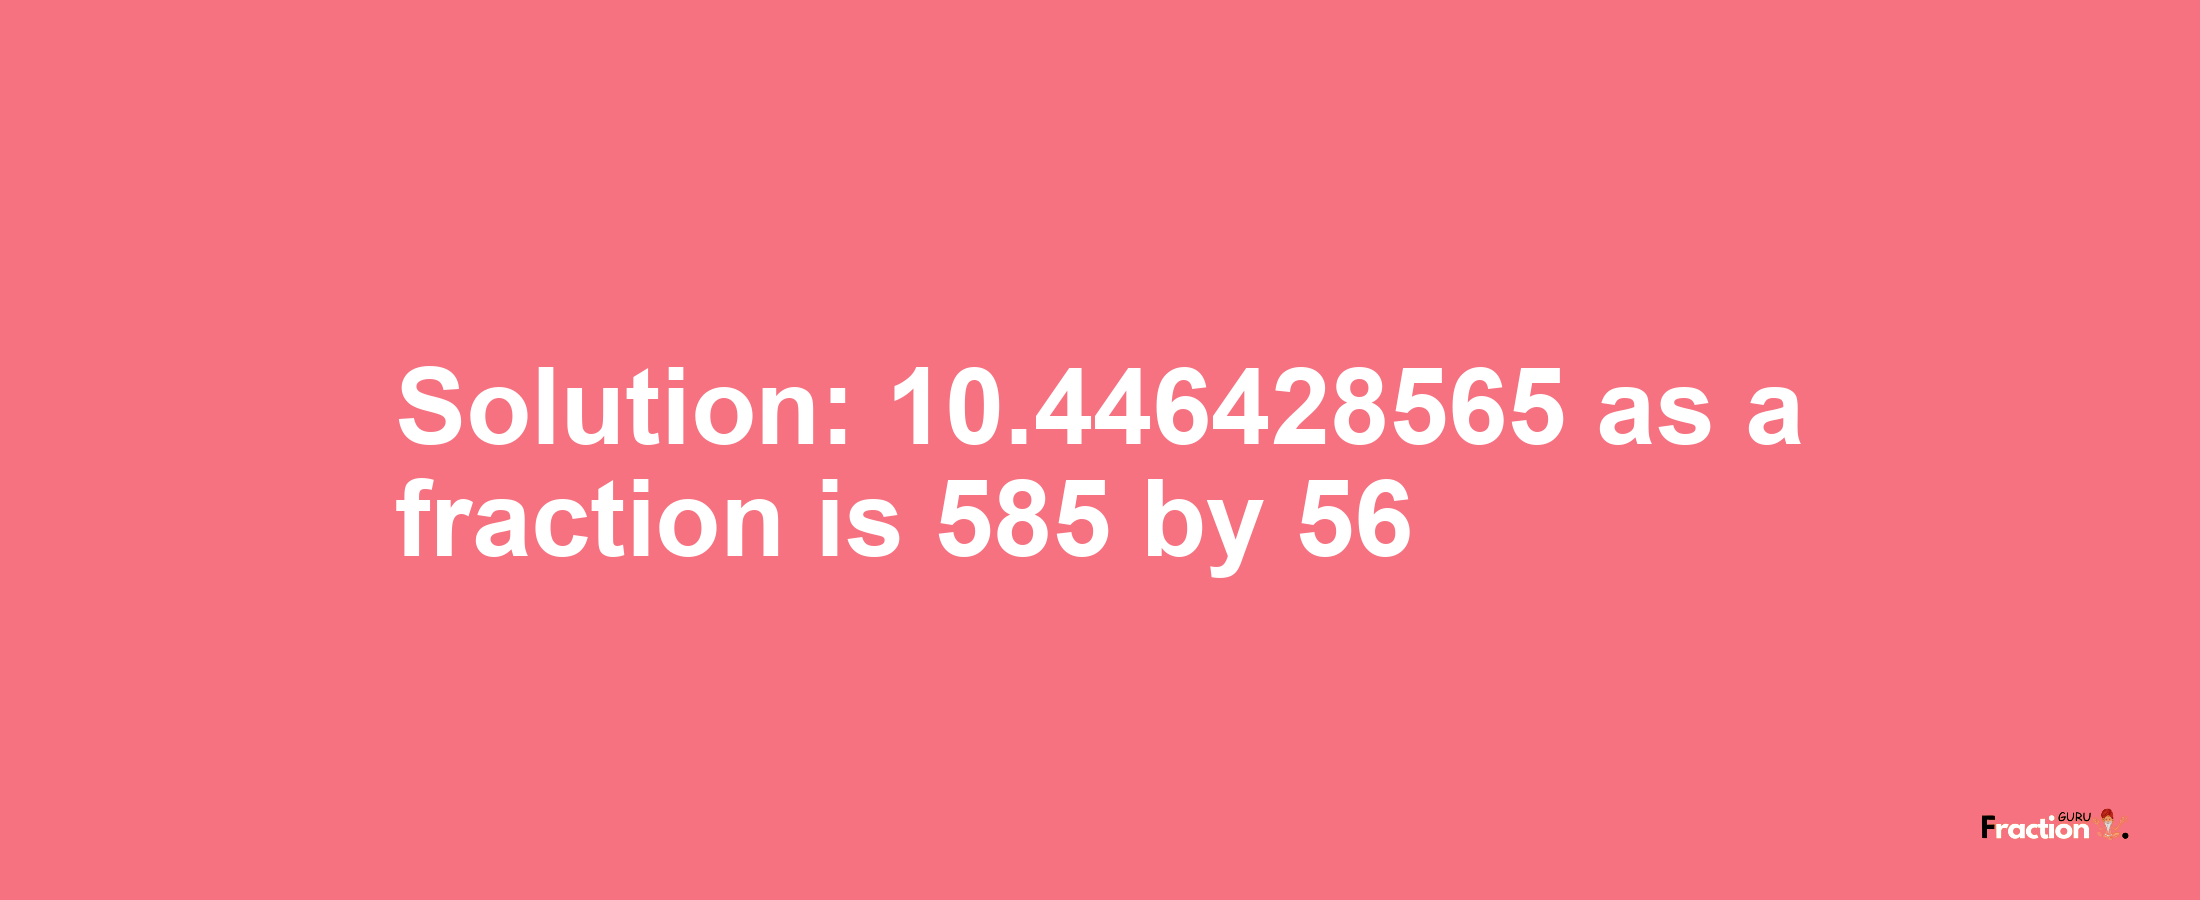 Solution:10.446428565 as a fraction is 585/56